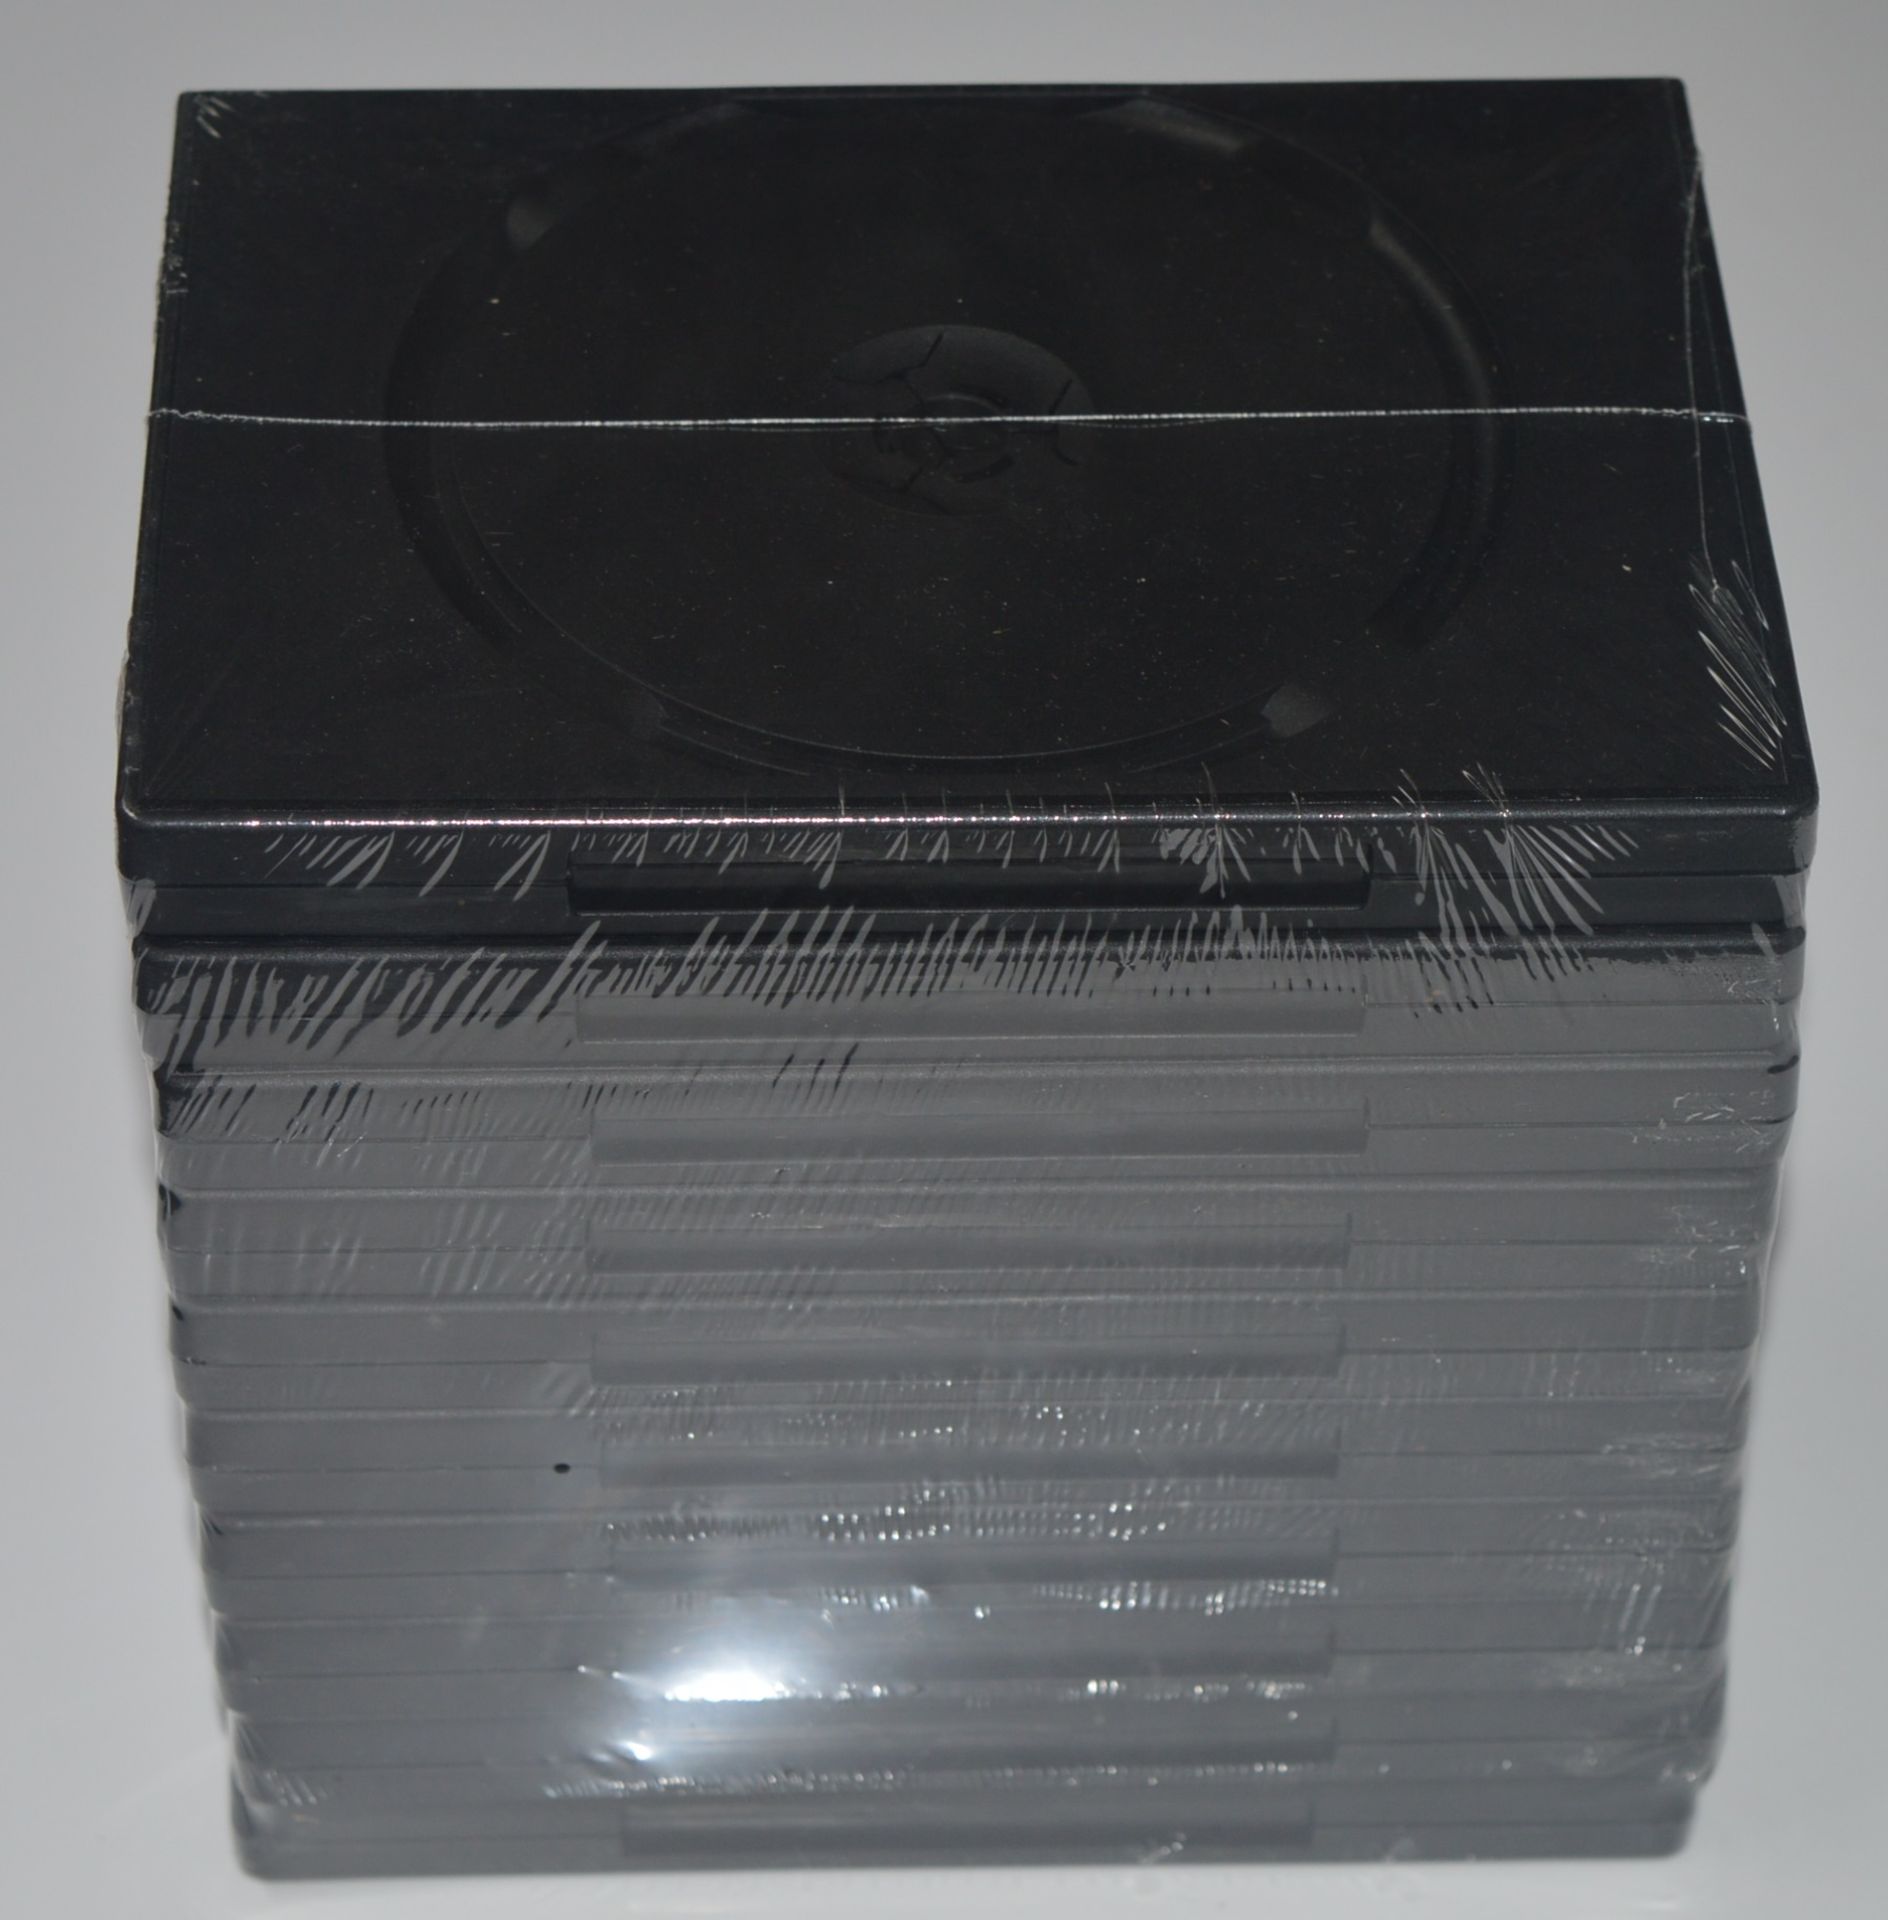 50 x Triple Load Black CD/DVD Case With Inner Tray and Full Sleeve - 18mm Thickness - Media Storage